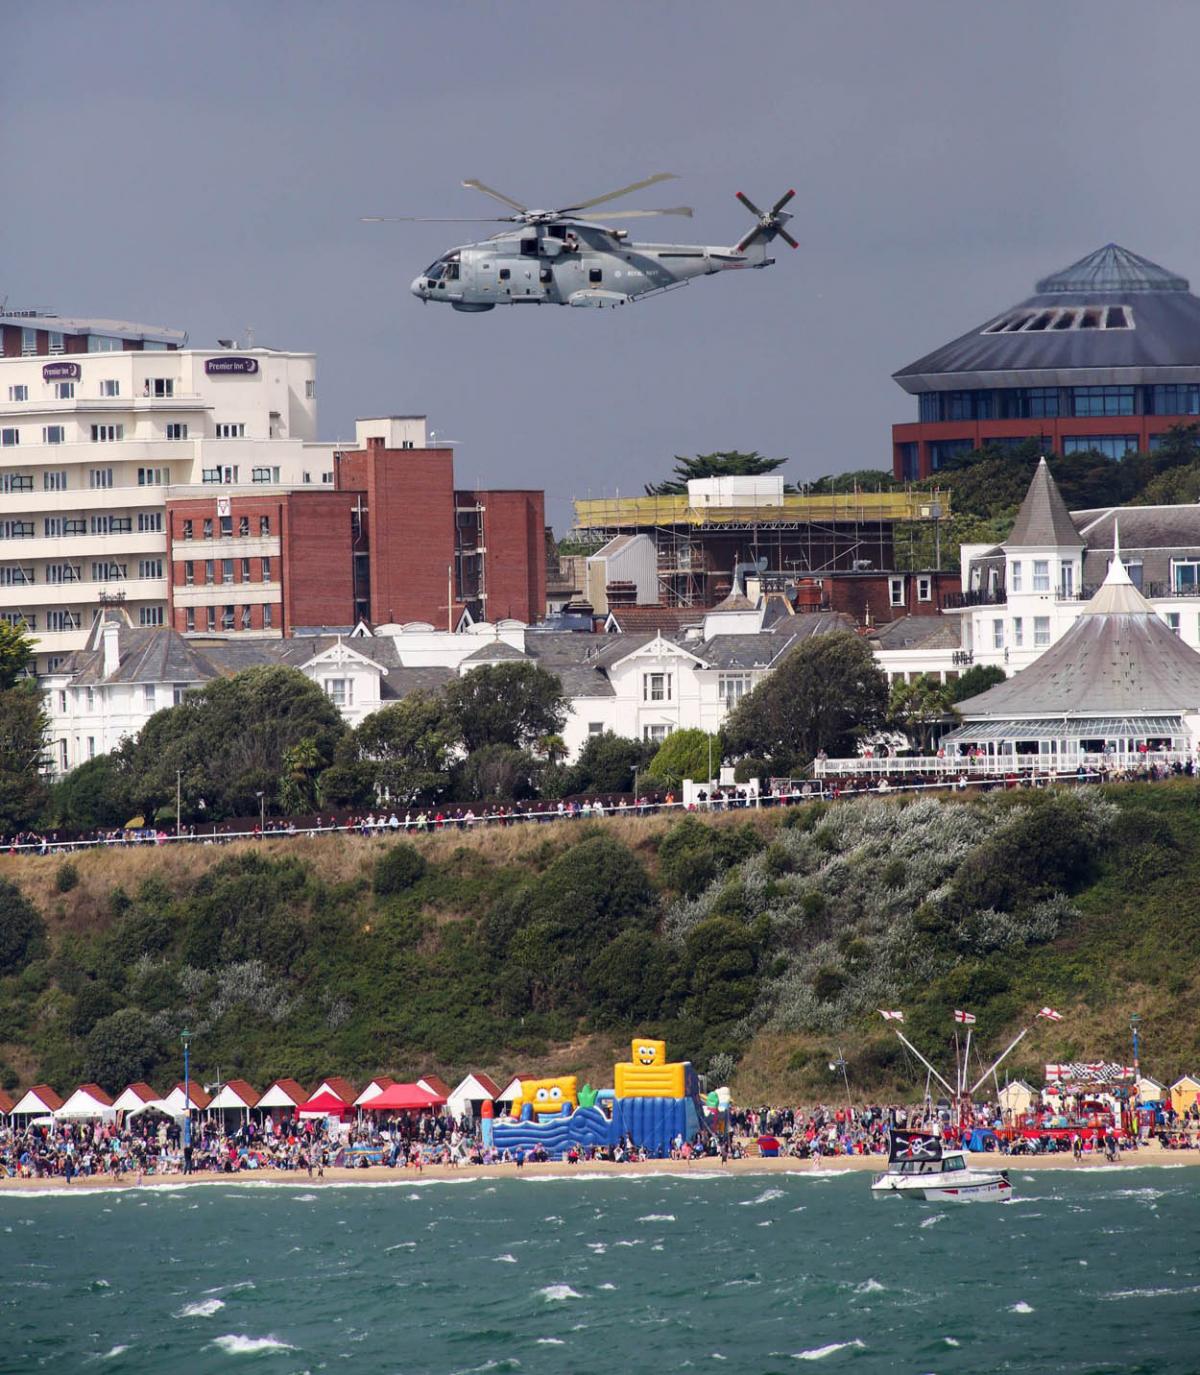 Check out all our pictures from day two of the Bournemouth Air Festival 2014, on Friday, August 29. Photo by Richard Crease.